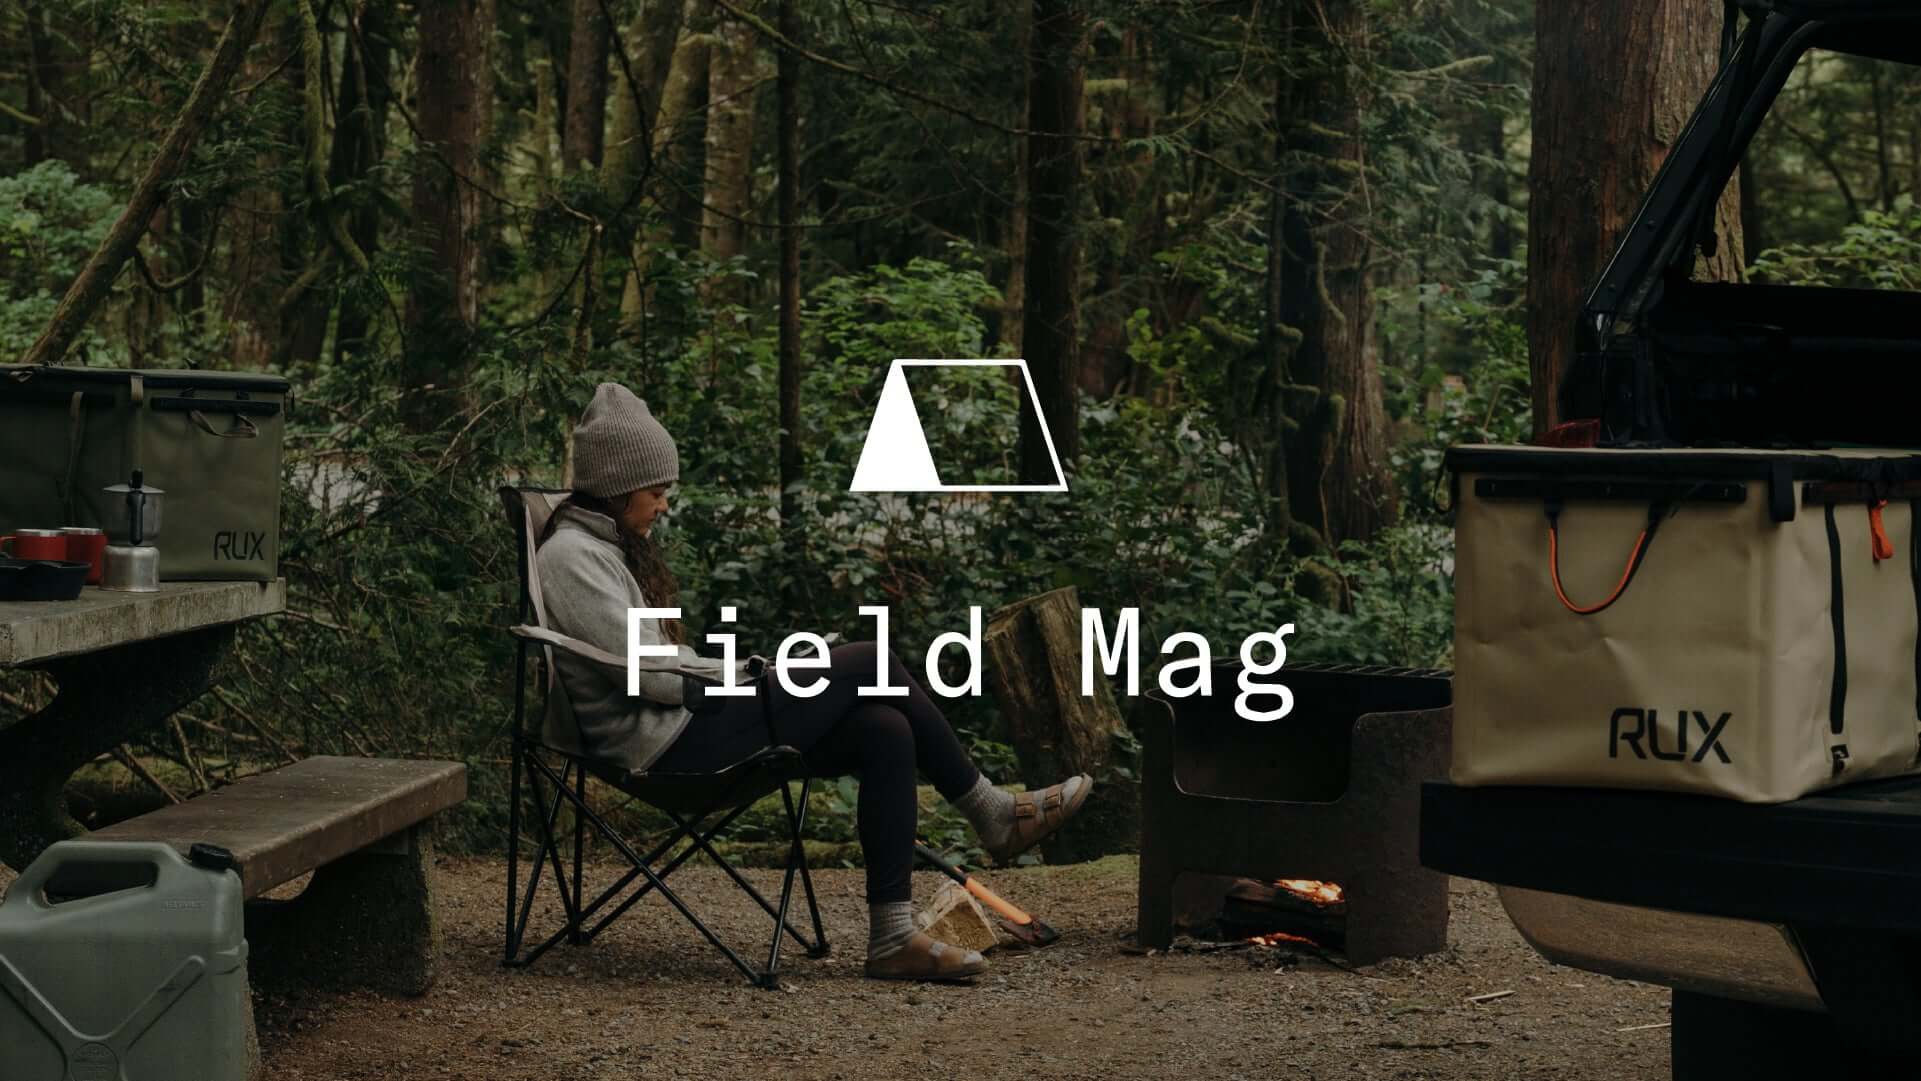 The RUX 70L is Featured in Field Mag's “Gifts for Campers!”